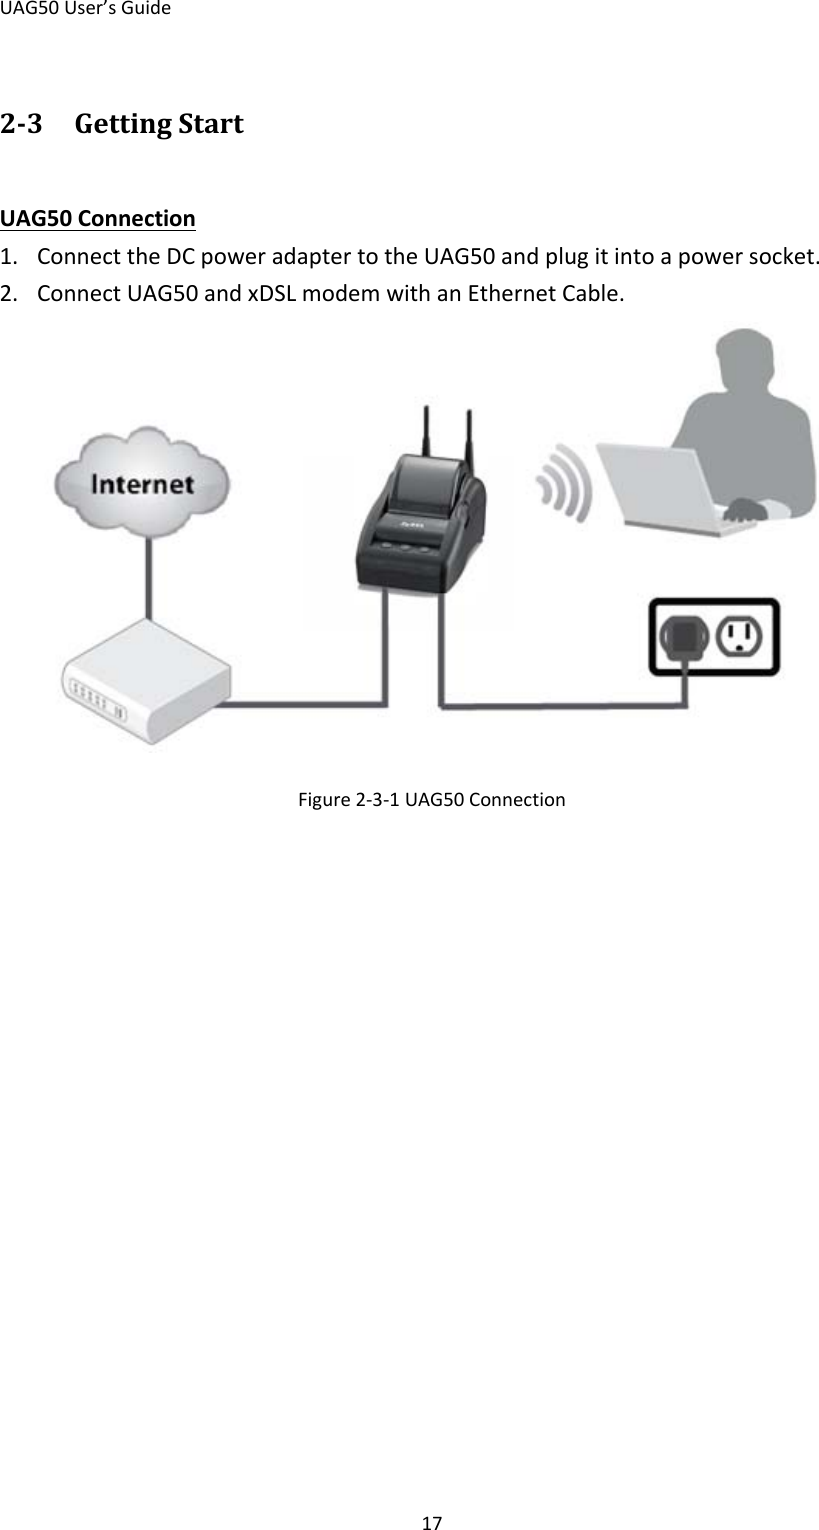 UAG50 User’s Guide 17 2-3 Getting Start 1. Connect the DC power adapter to the UAG50 and plug it into a power socket. UAG50 Connection 2. Connect UAG50 and xDSL modem with an Ethernet Cable.  Figure 2-3-1 UAG50 Connection   